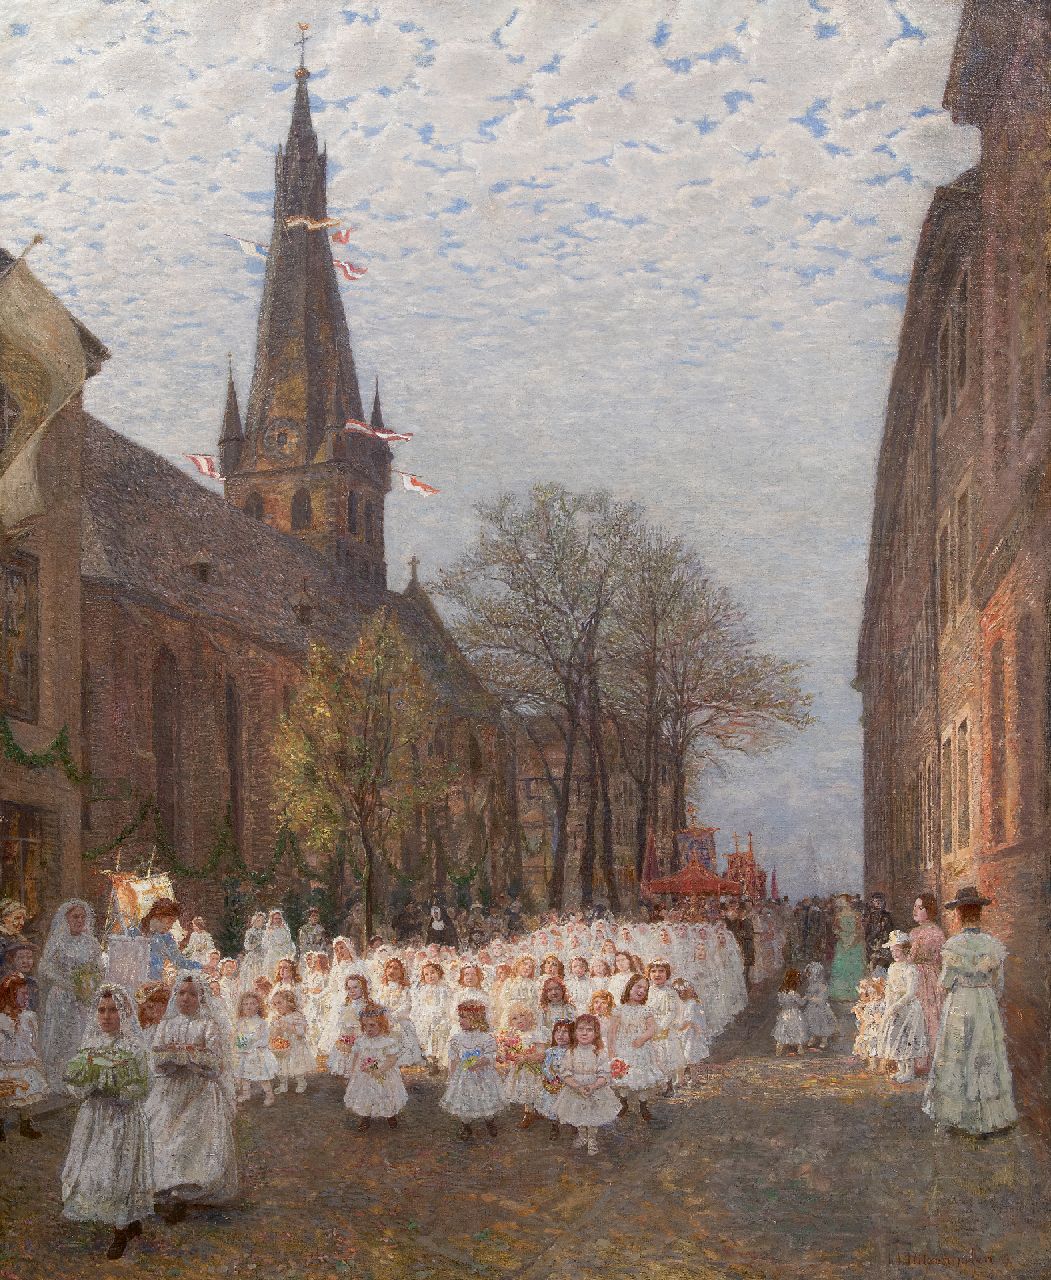 Hubert Ritzenhofen | Procession of the first communicants alongside church of St. Lambertus in Düsseldorf, oil on canvas, 116.9 x 96.0 cm, signed l.r. and dated '09